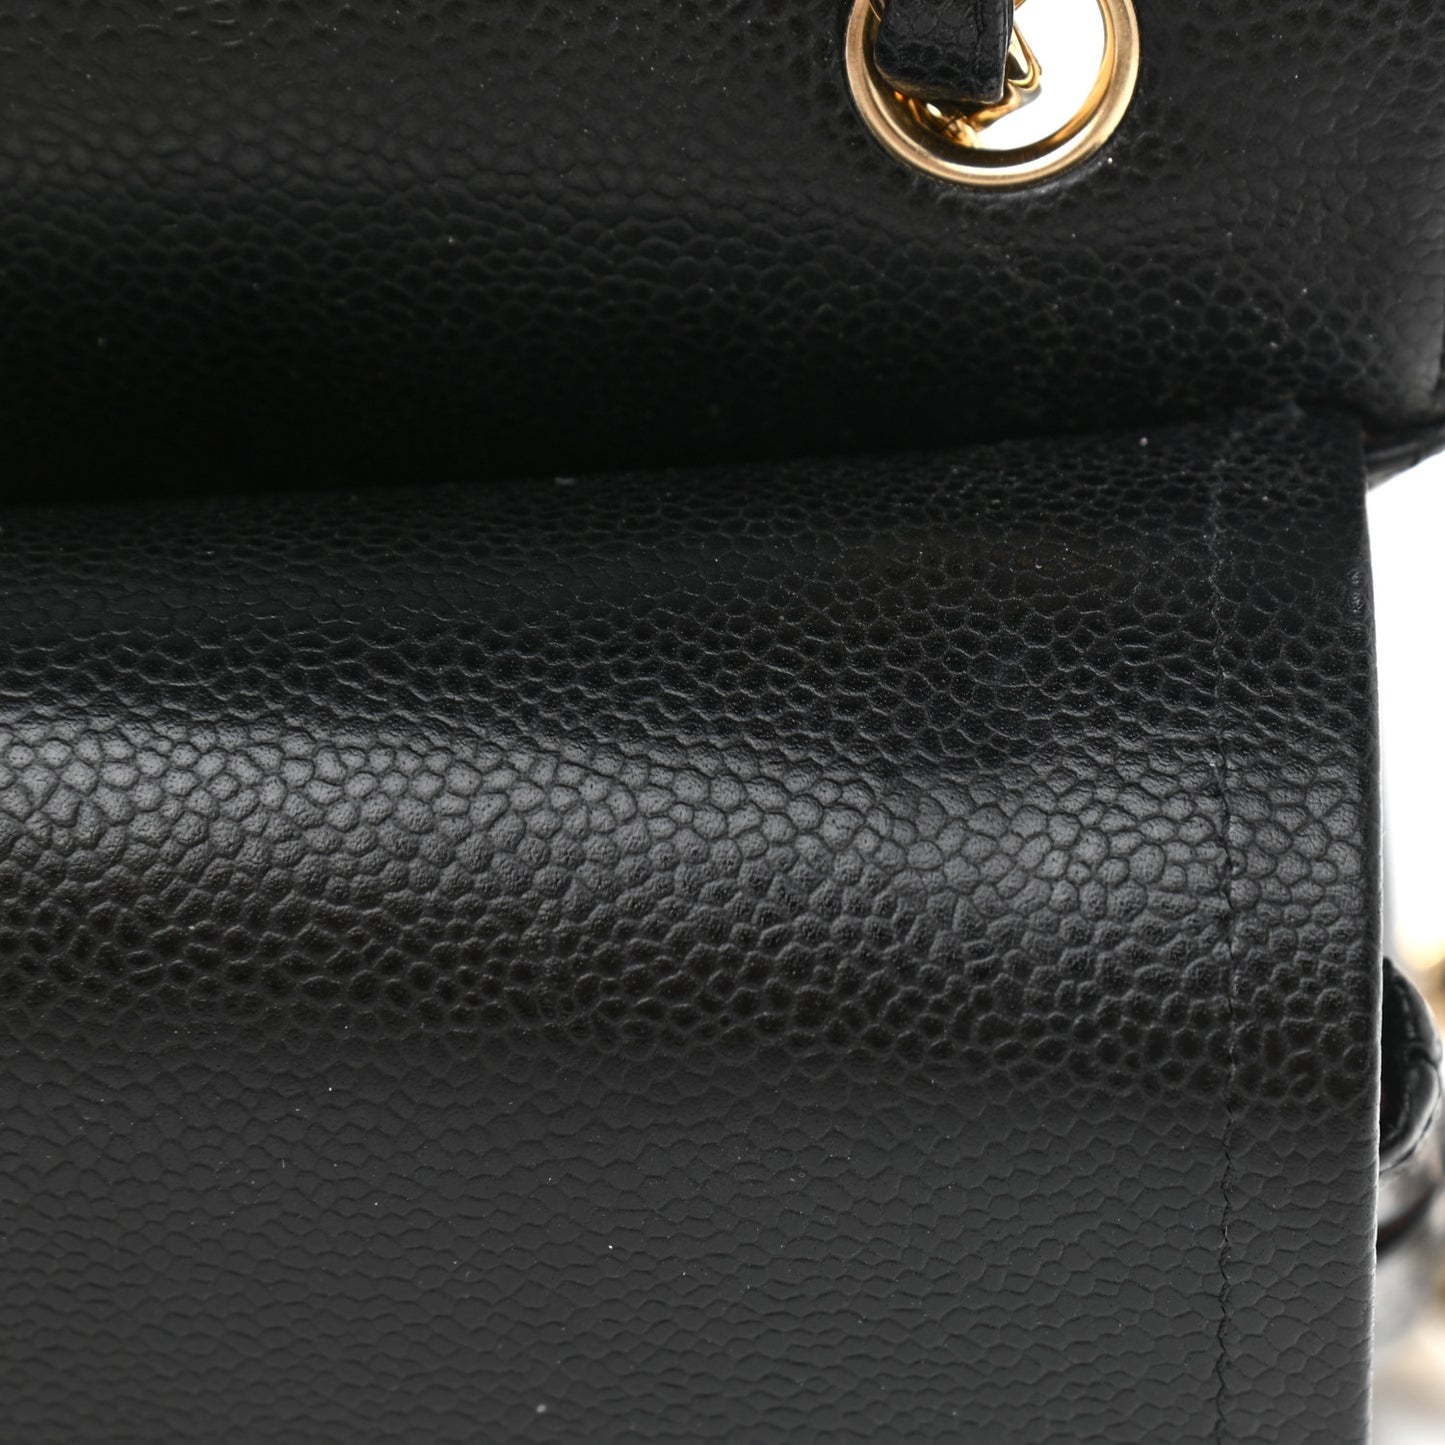 Caviar Quilted Jumbo Double Flap Black